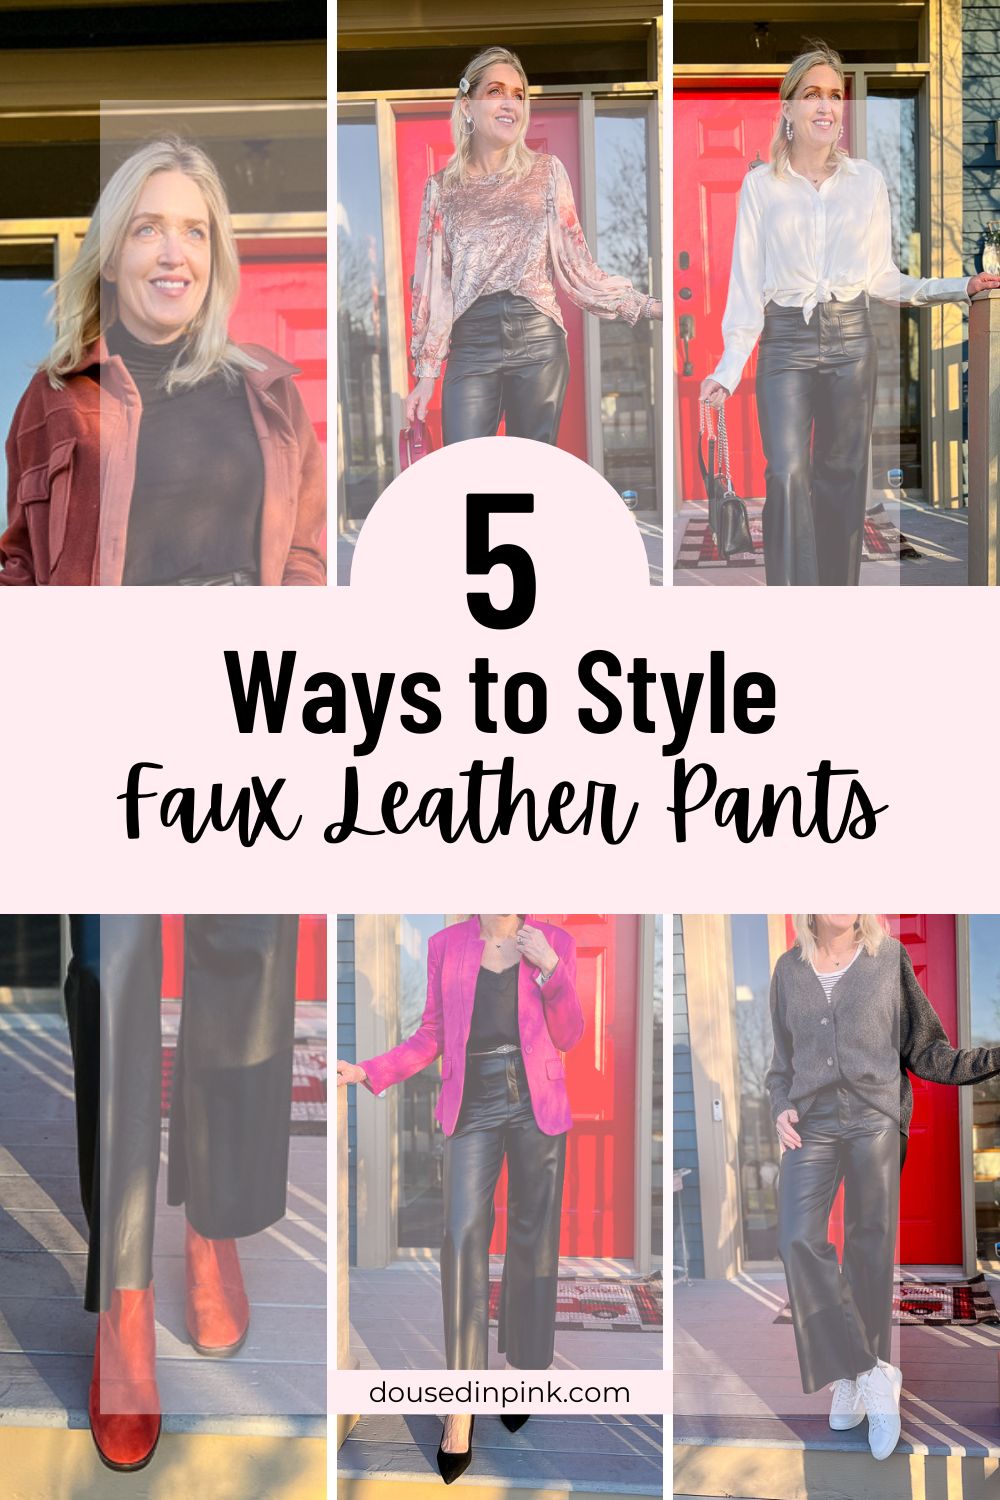 Leather Leggings Summer Outfits In Their 30s (14 ideas & outfits)